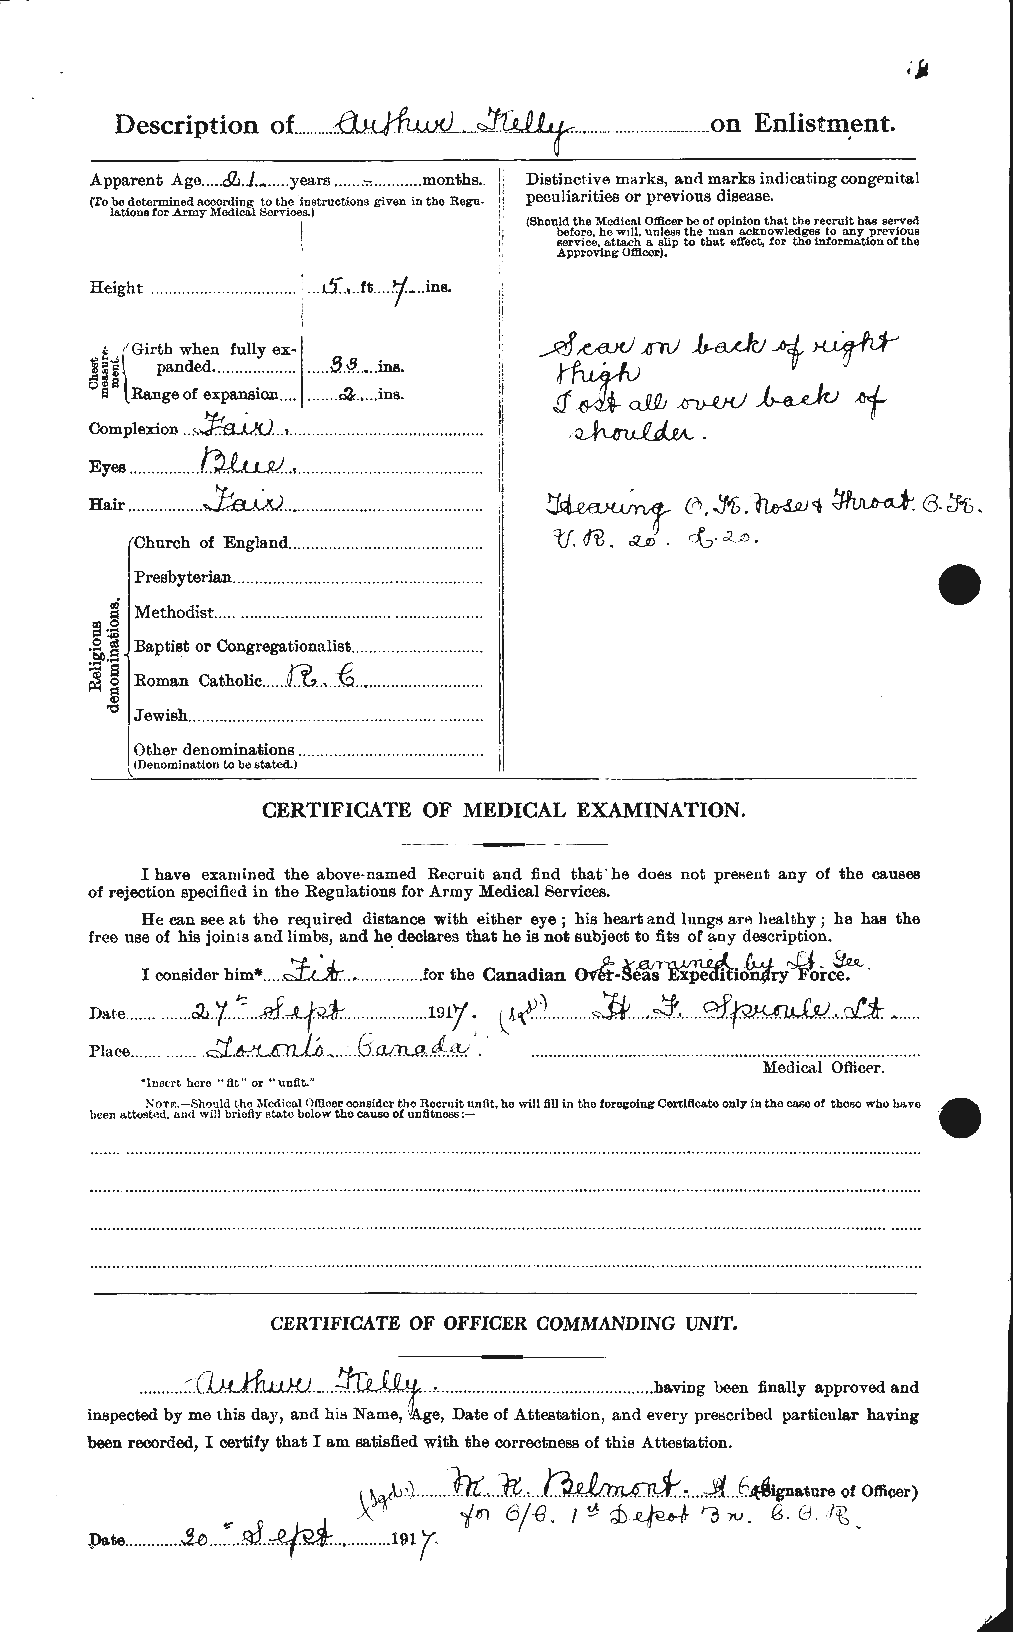 Personnel Records of the First World War - CEF 691506b